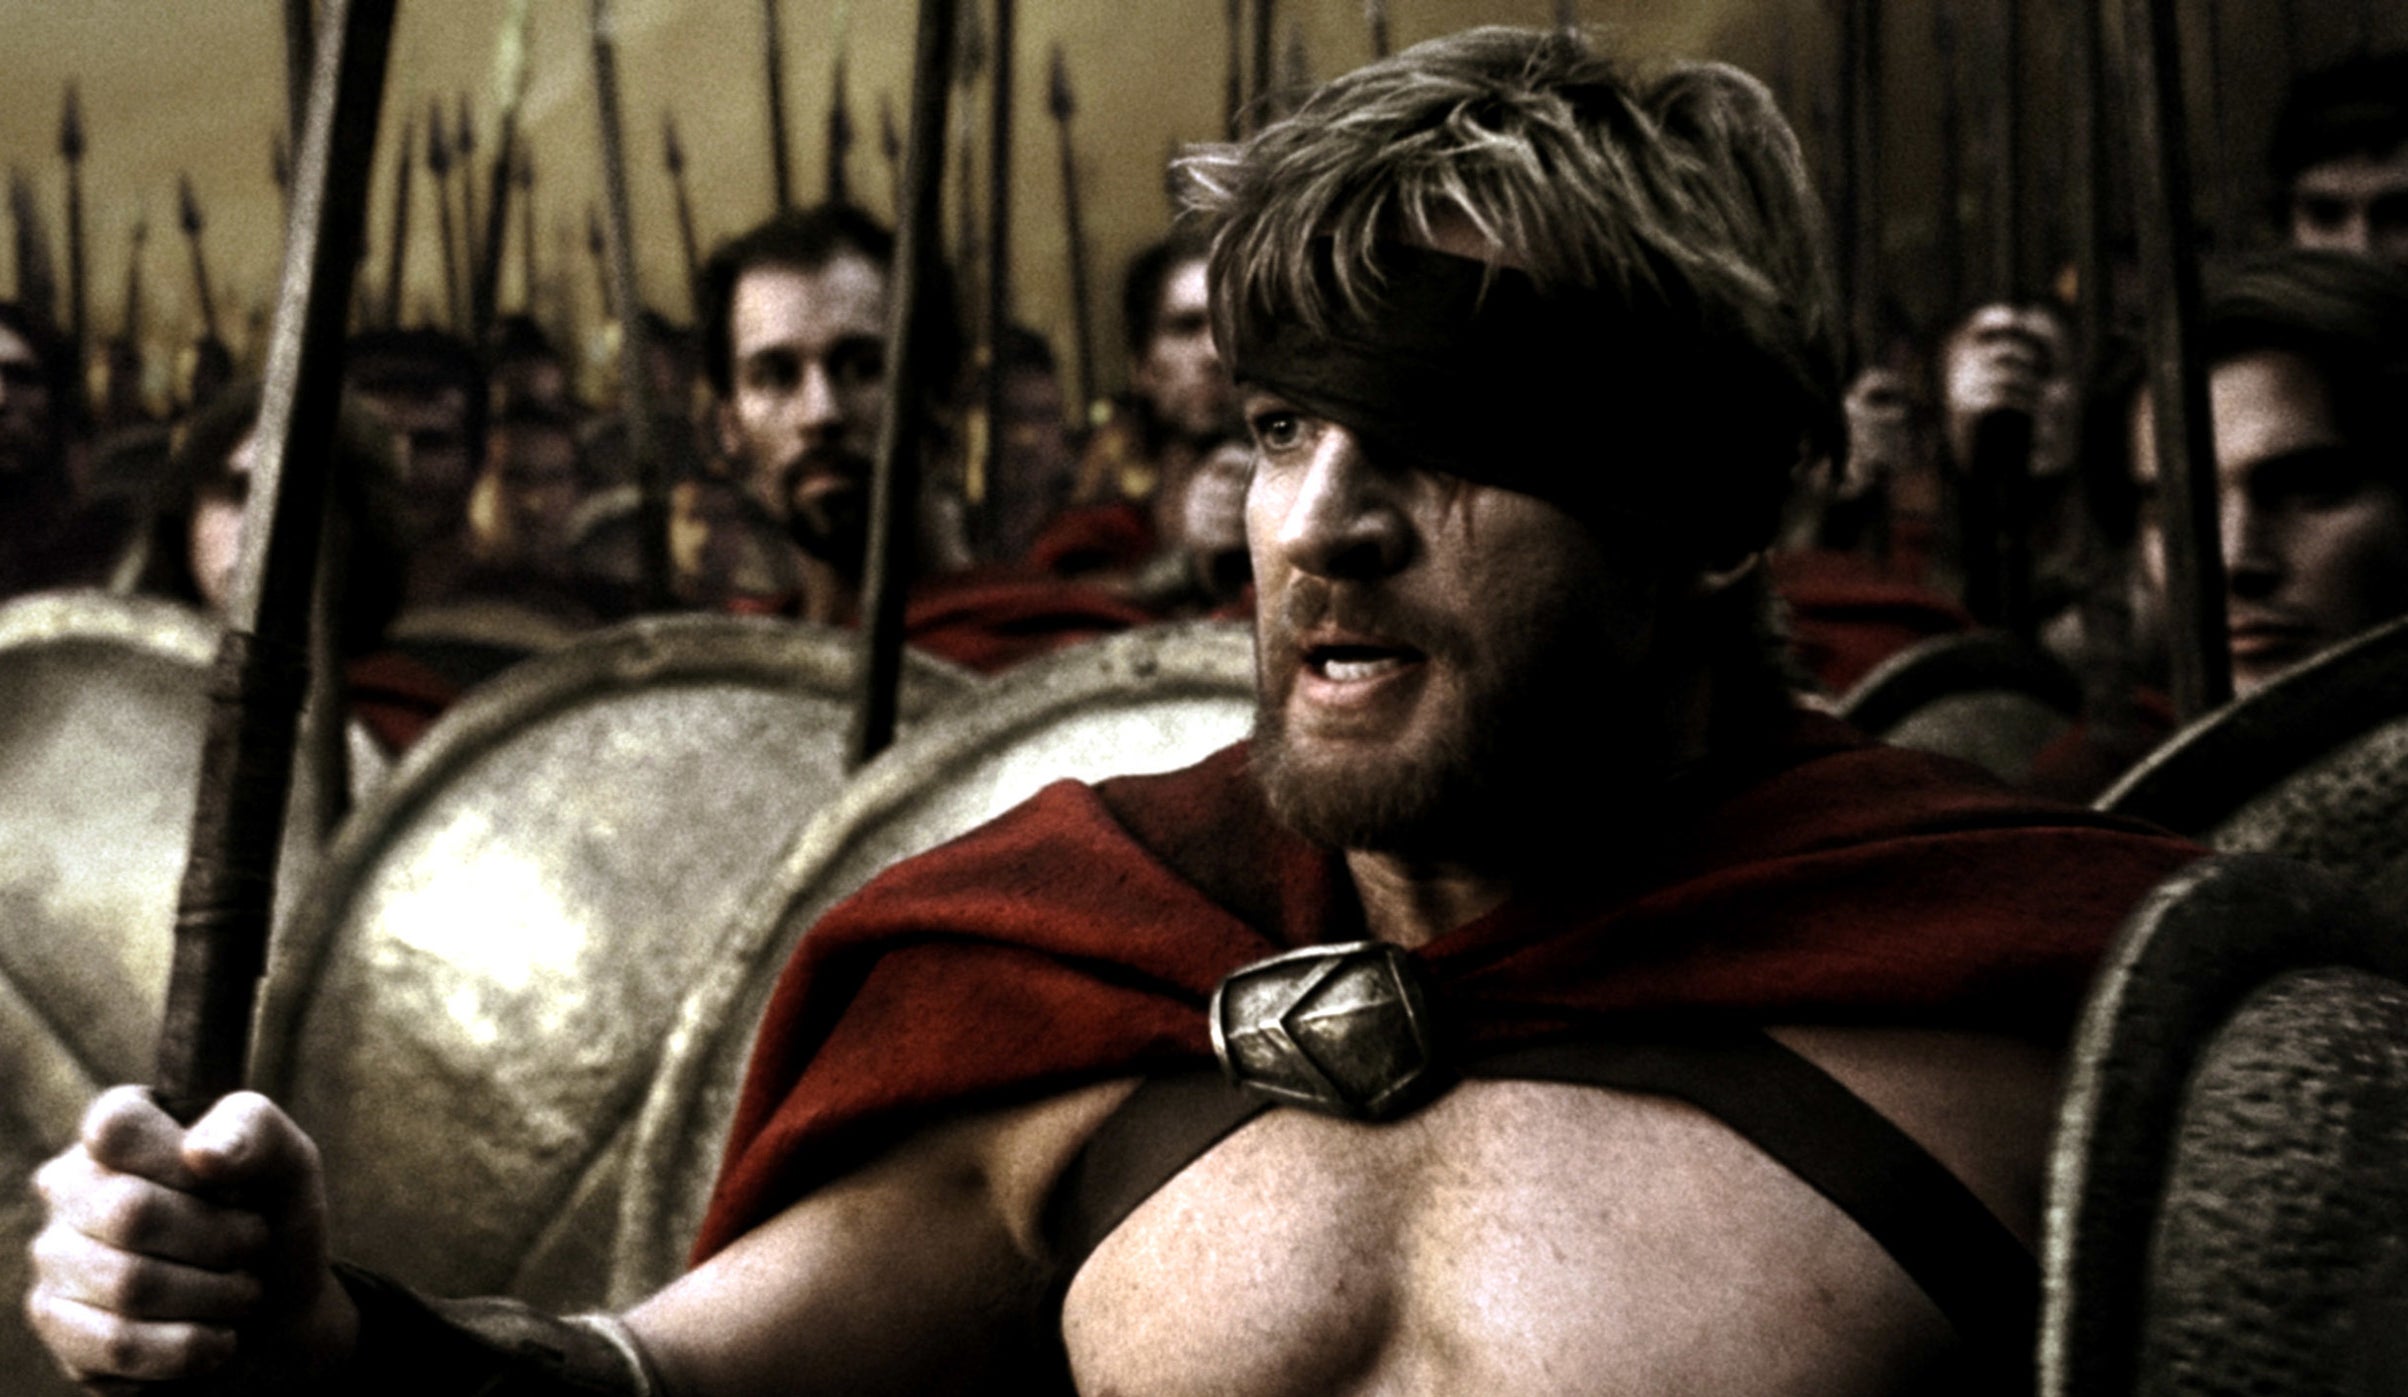 David Wenham in 300 holding a weapon and shield